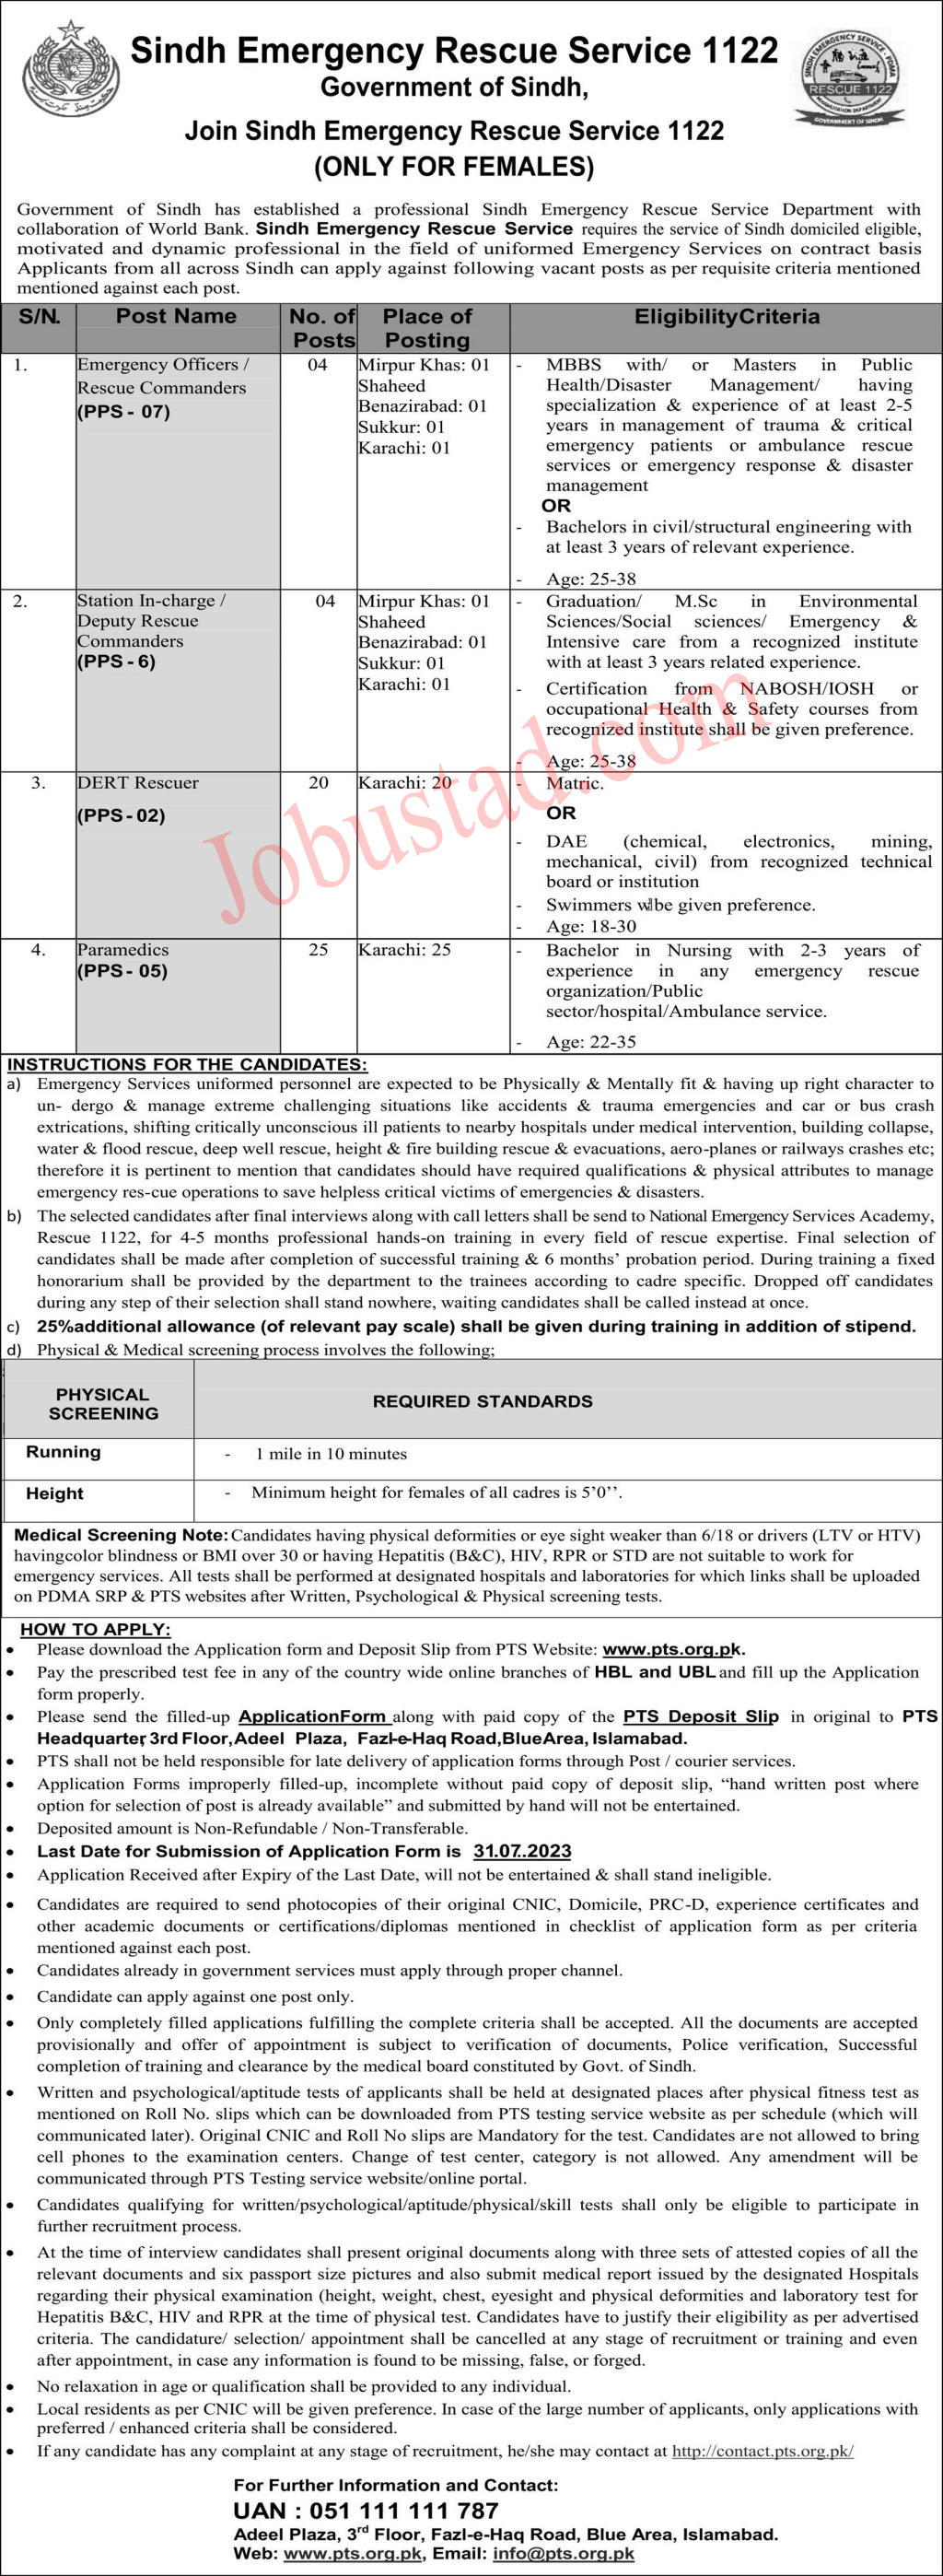 Jobs Announce in Sindh Emergency Rescue Service 1122 